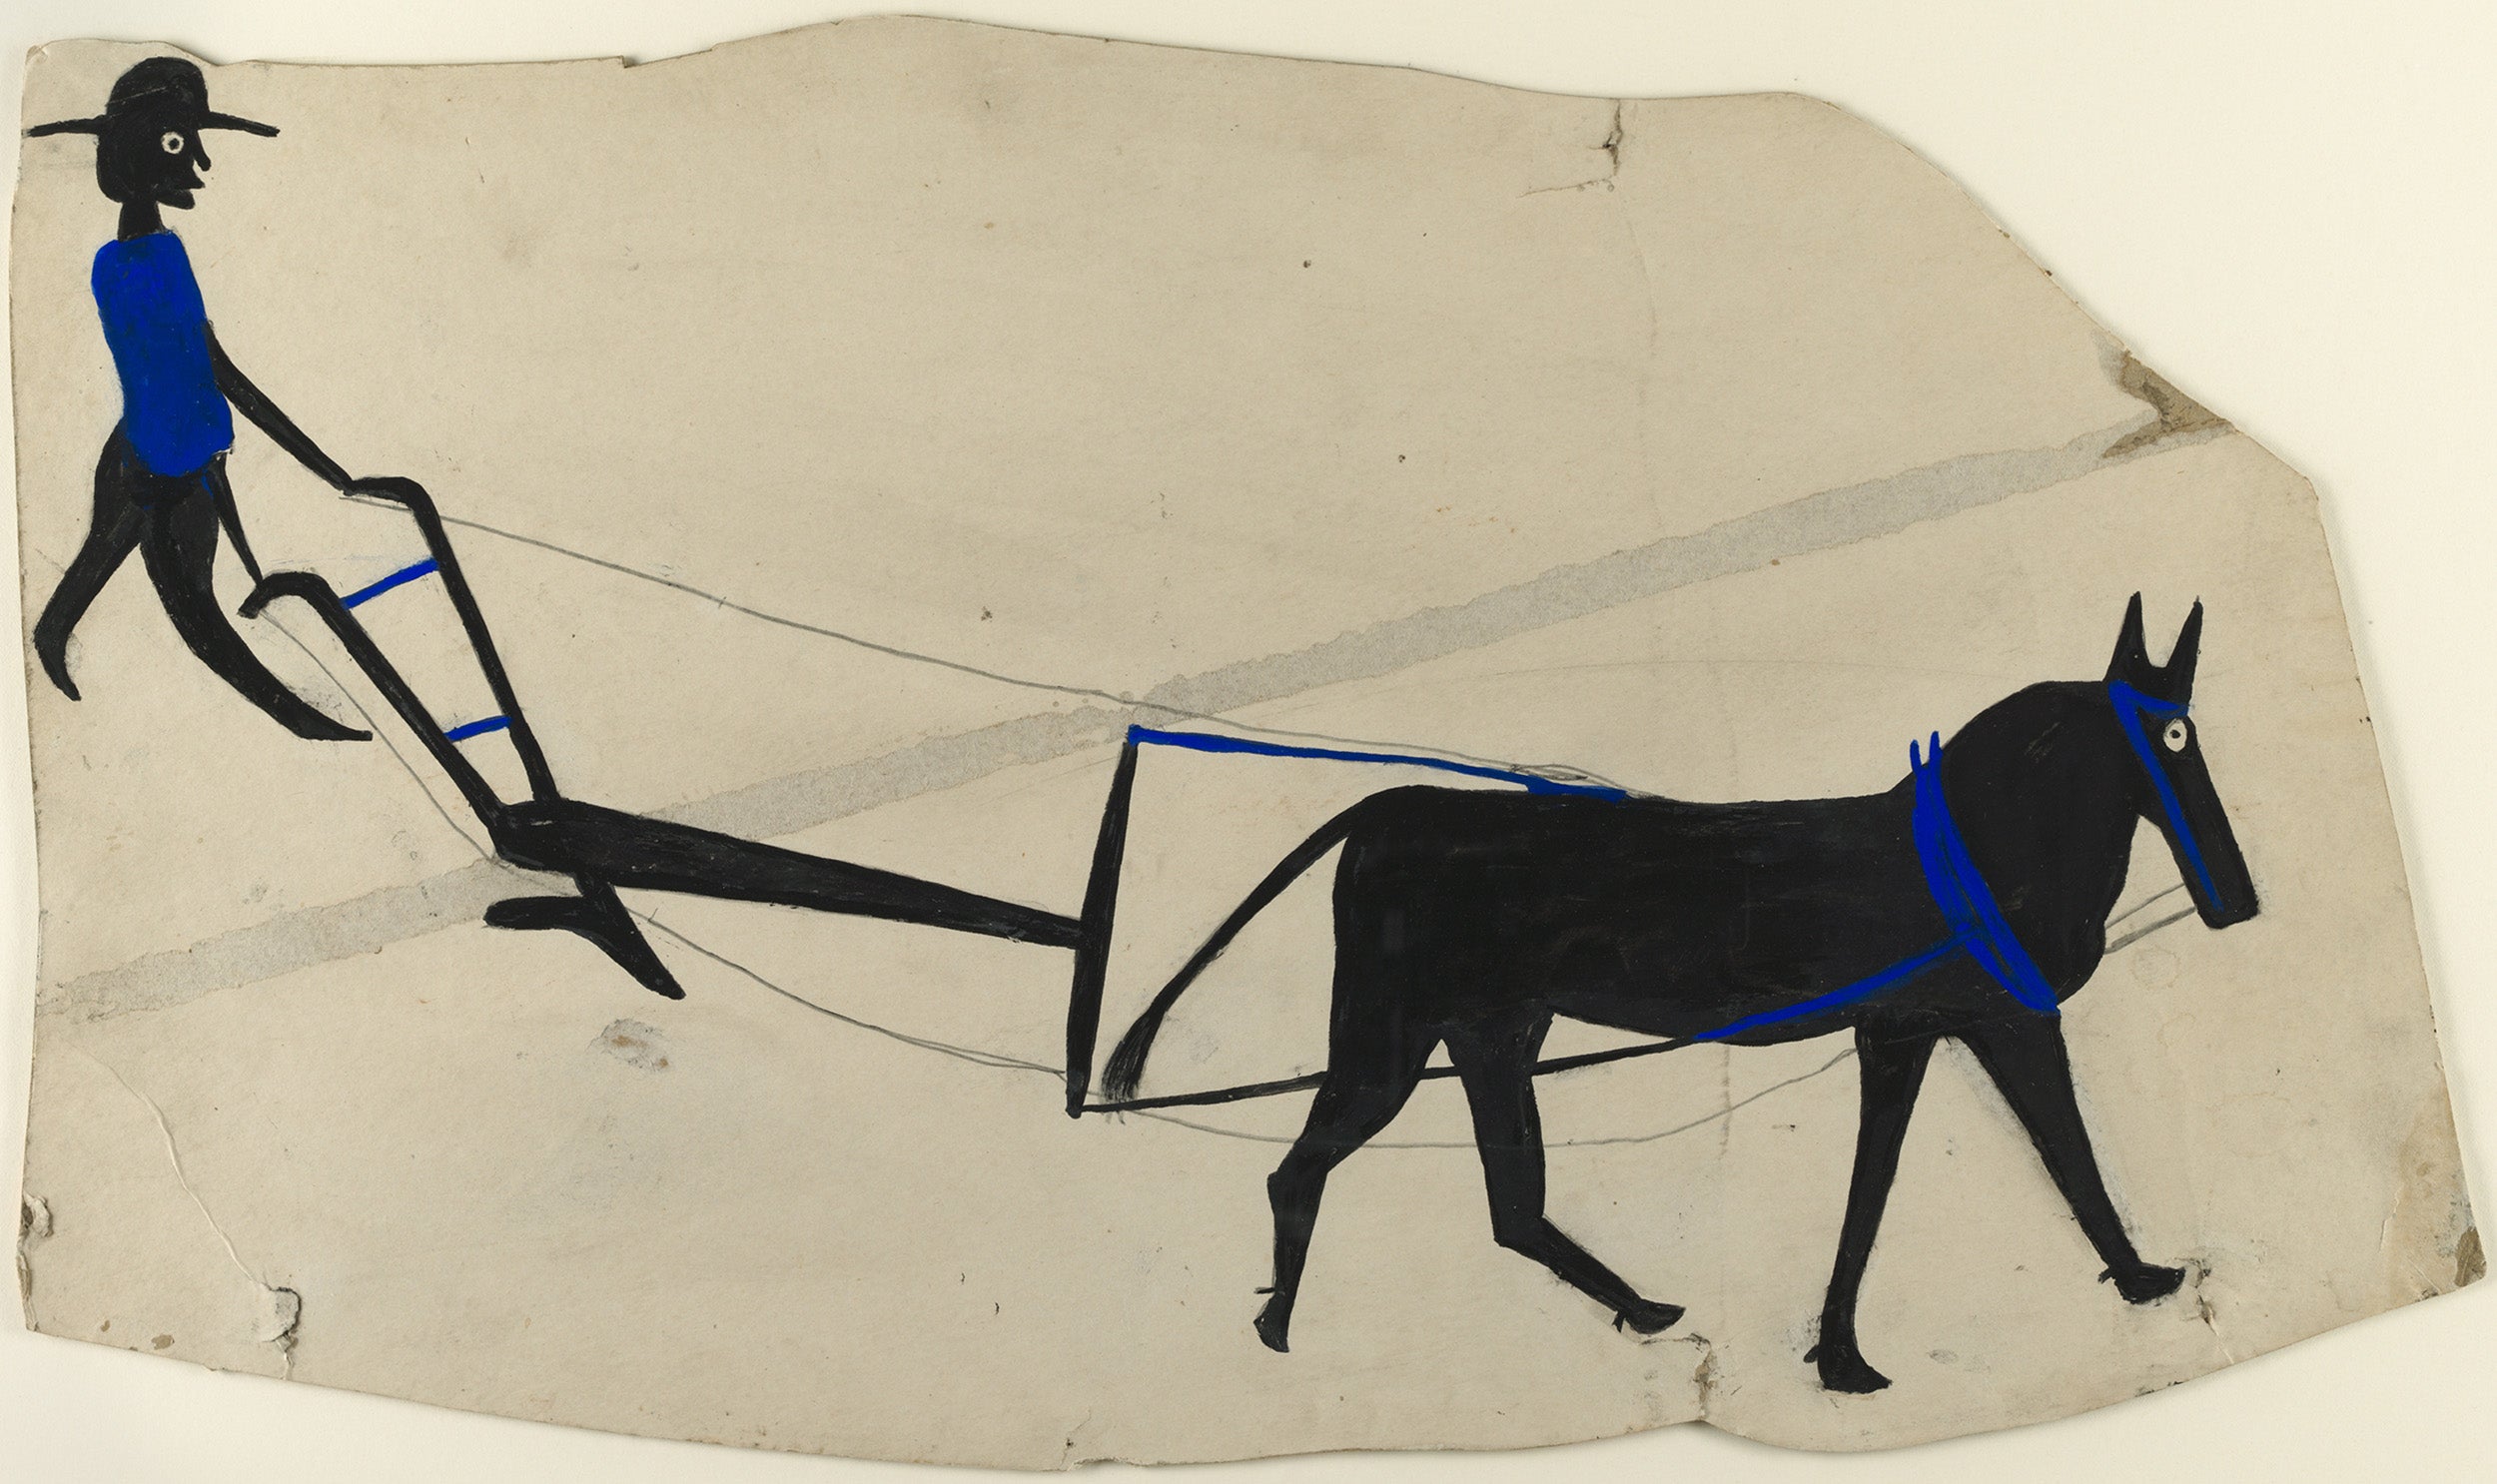 "Mule and Plow" by Bill Traylor.